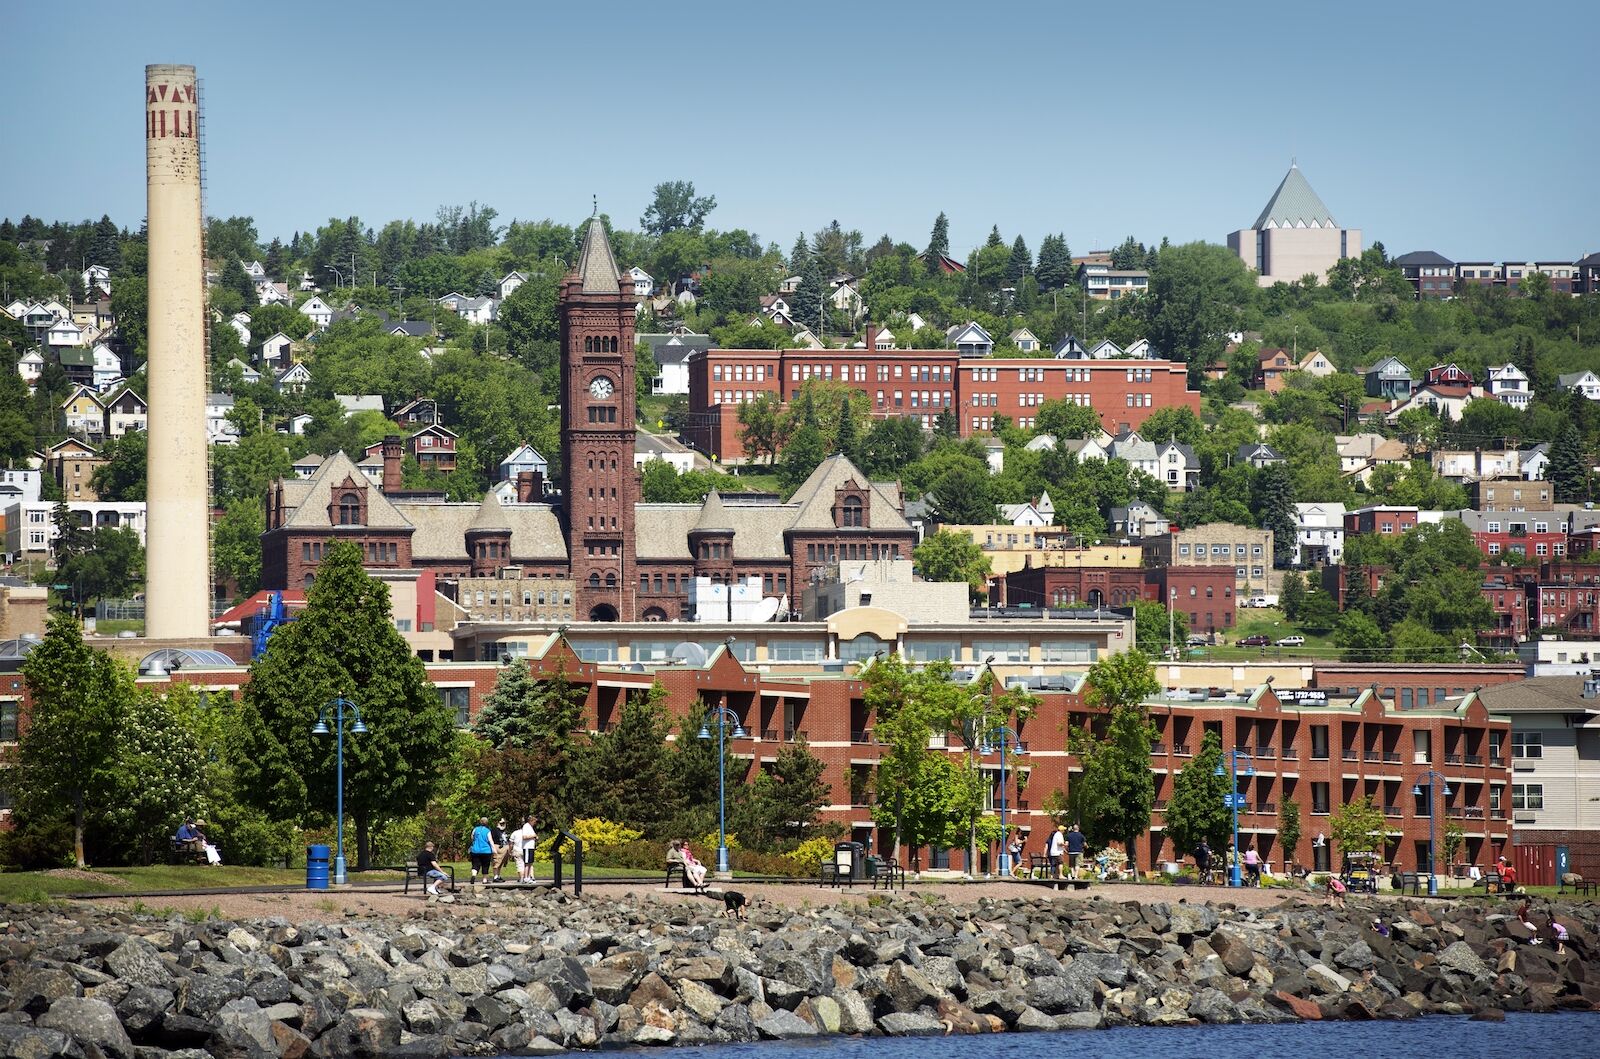 Duluth is a Seaport City in the U.S. State of Minnesota and is the County Seat of Saint Louis County. Duluth Cityscape Photo in Summer.